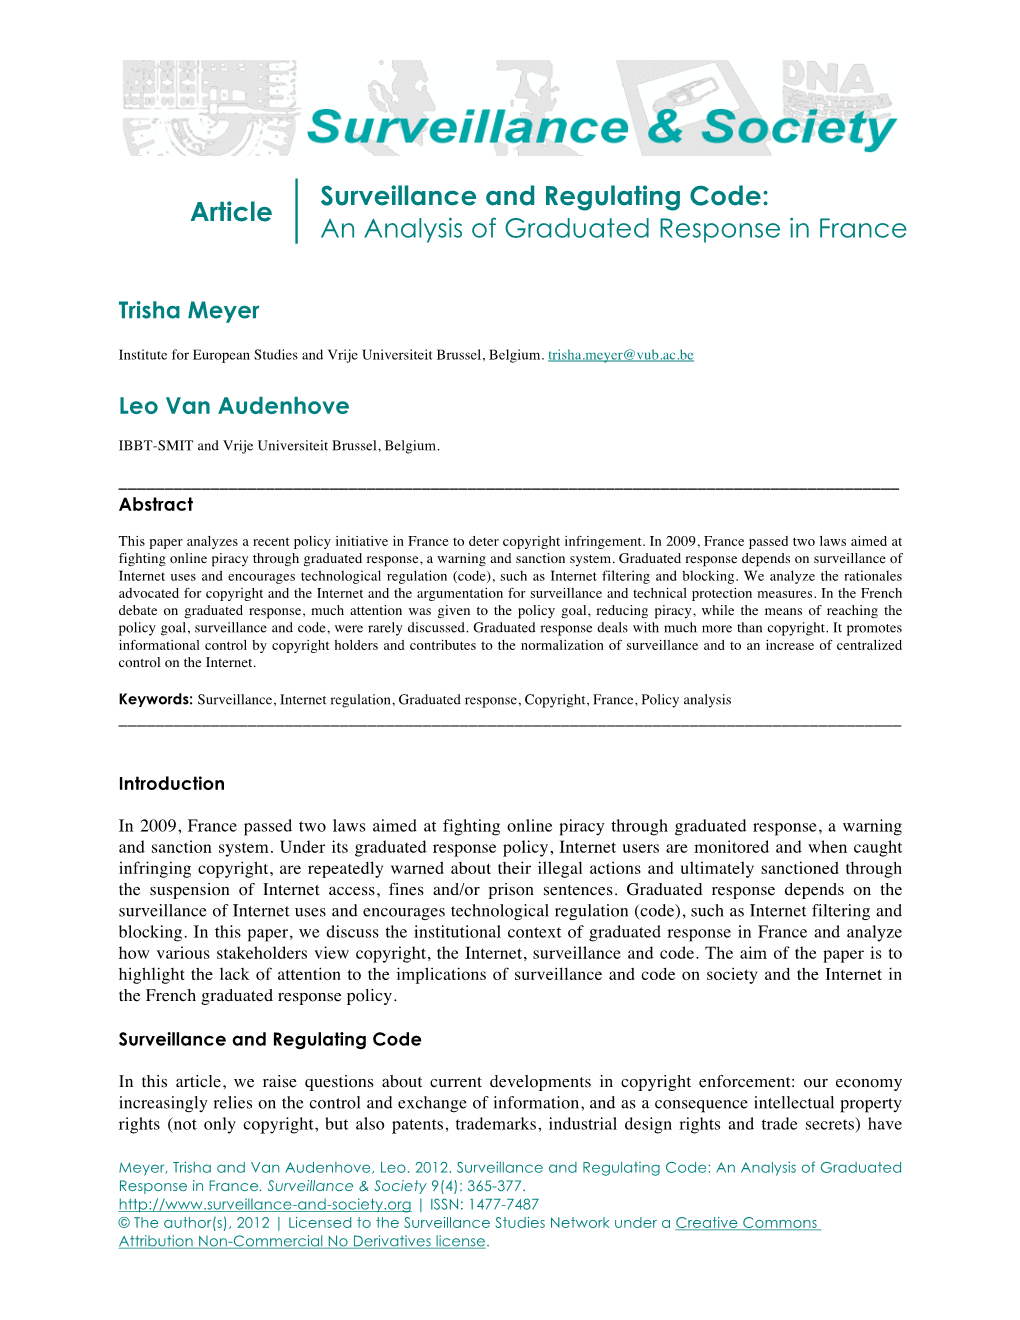 Article Surveillance and Regulating Code: an Analysis of Graduated